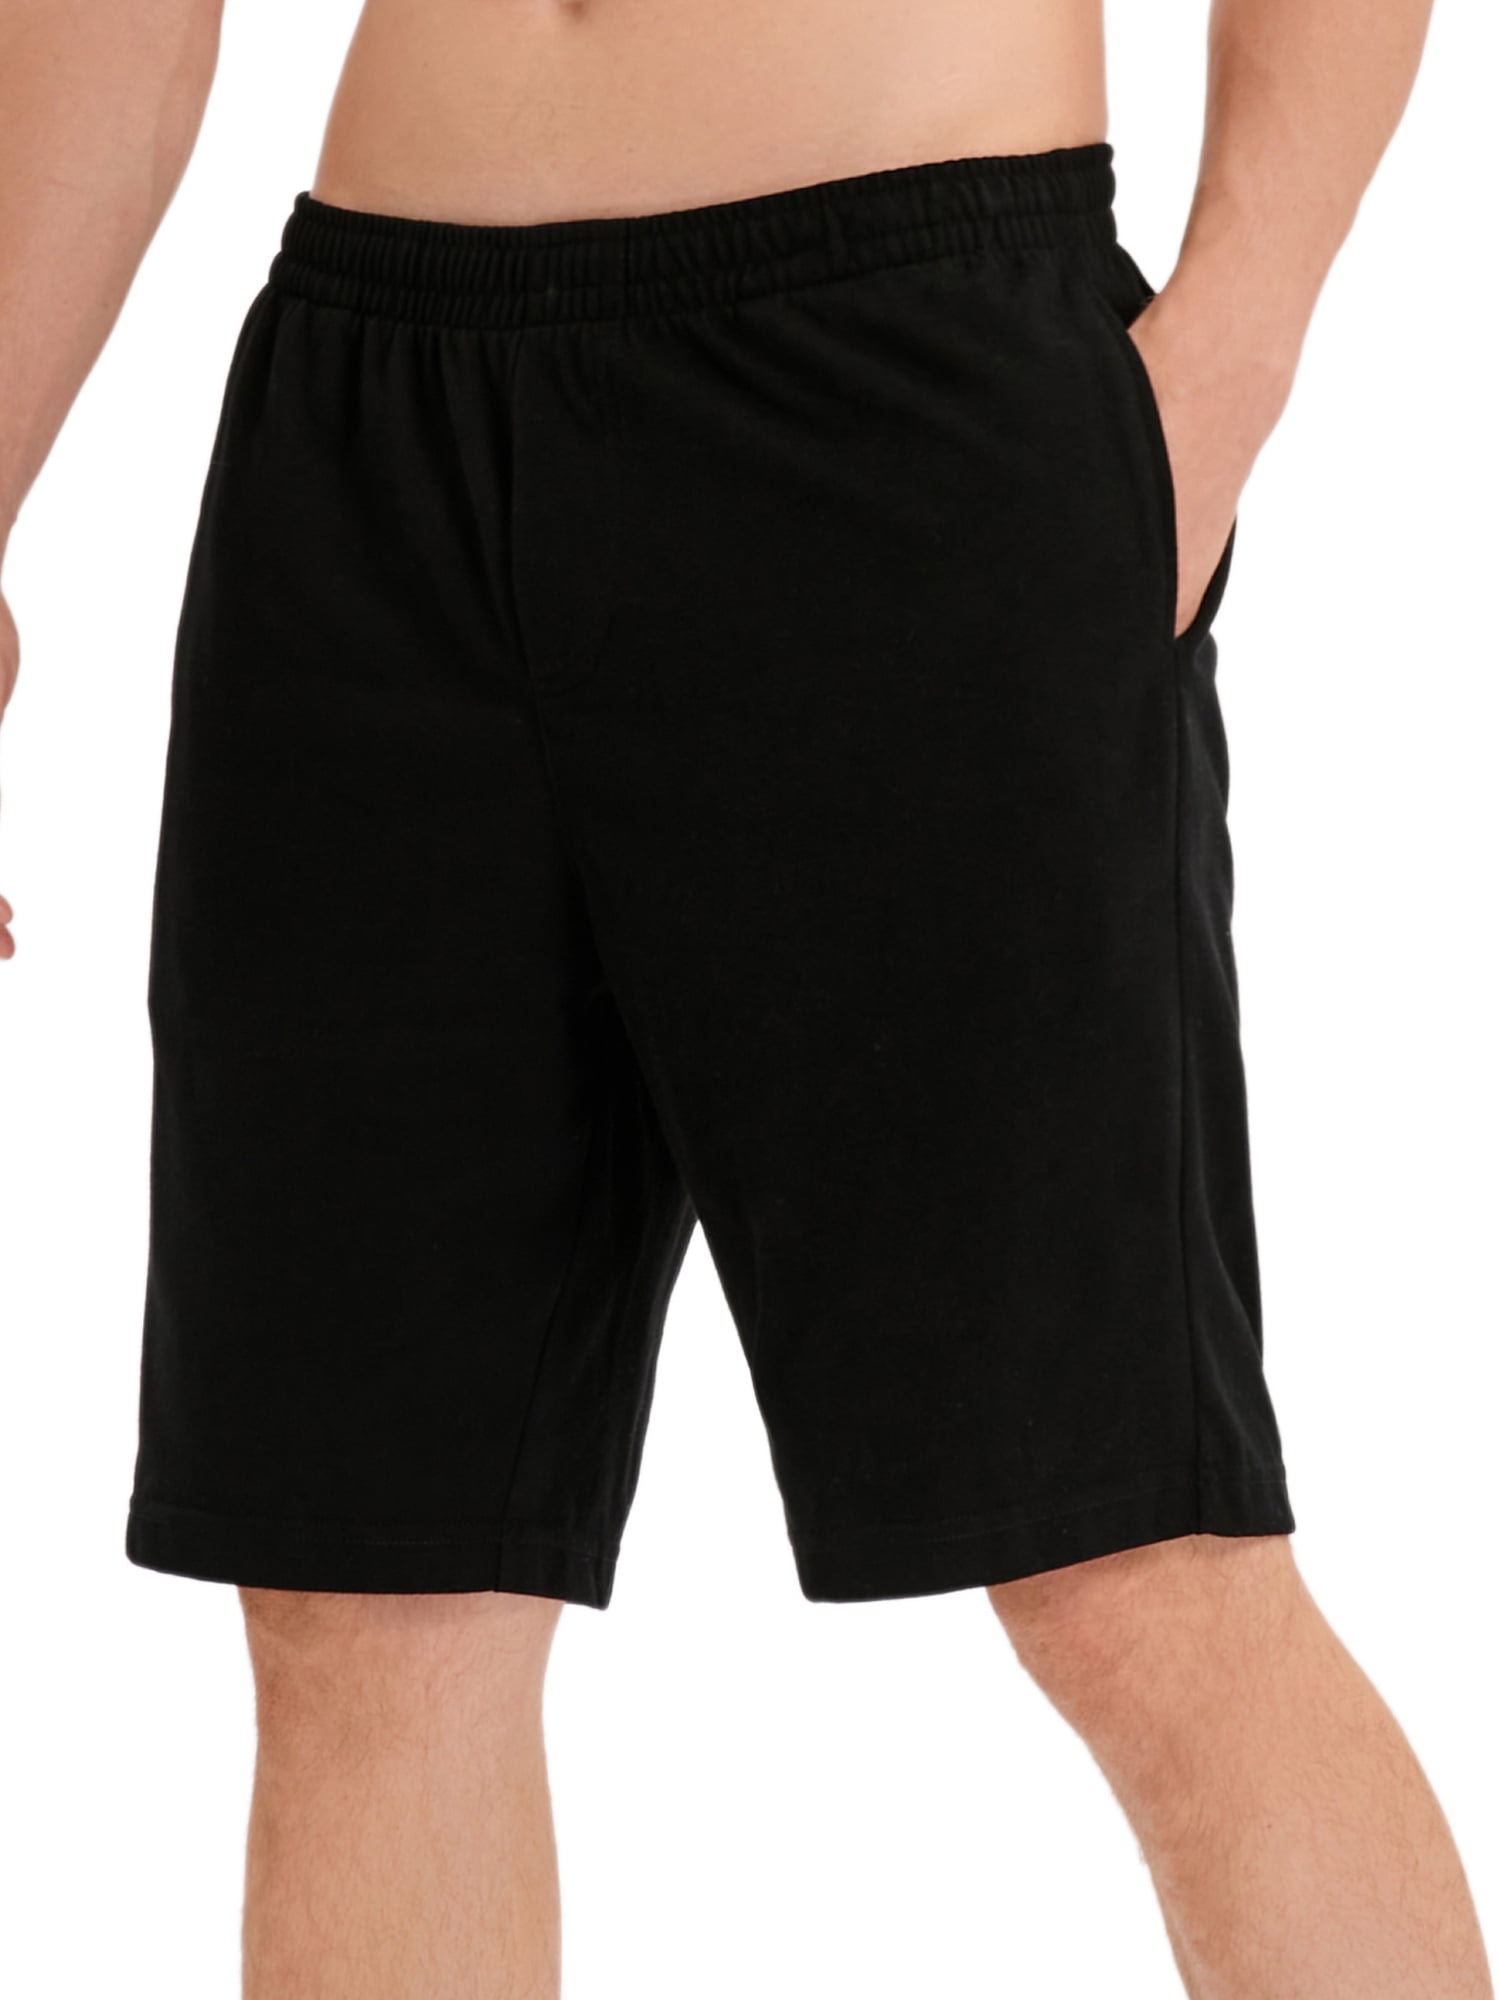 Mens Casual Active Sport Shorts Gym Running Fitness Sports Shorts Cool Football 